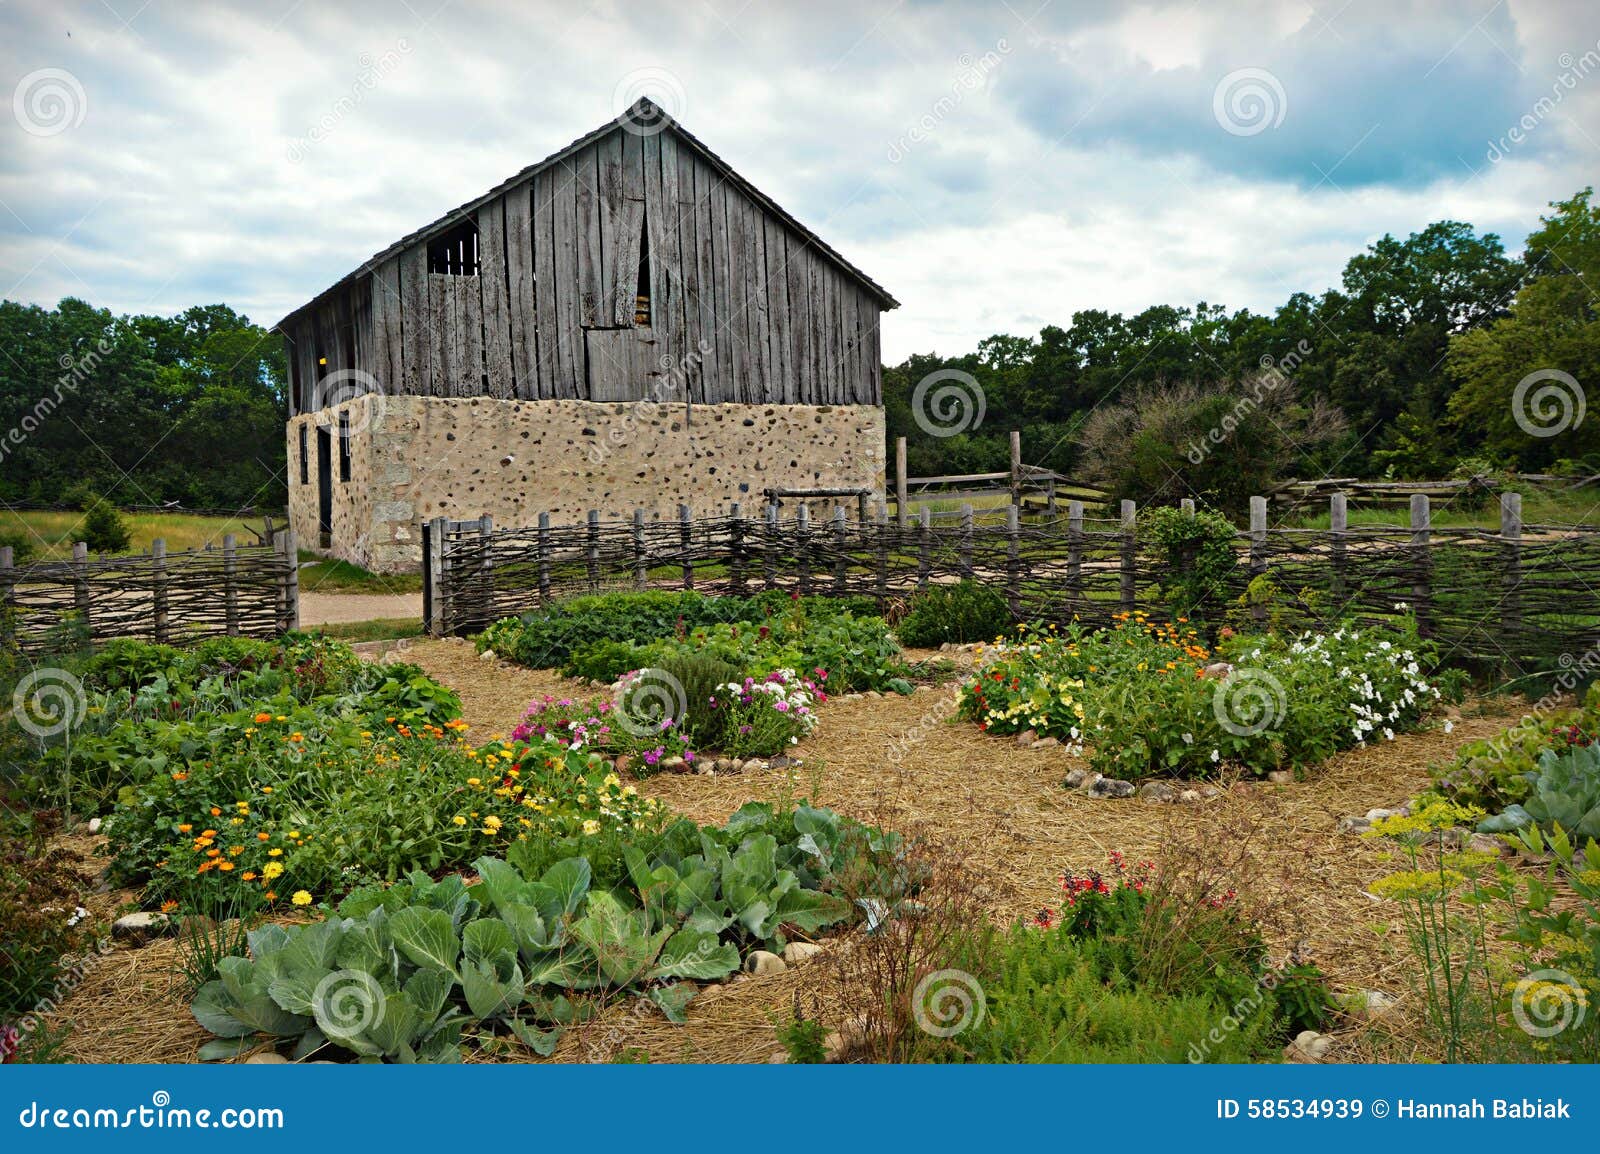 Historical Barn With Flower Garden Stock Image - Image of 